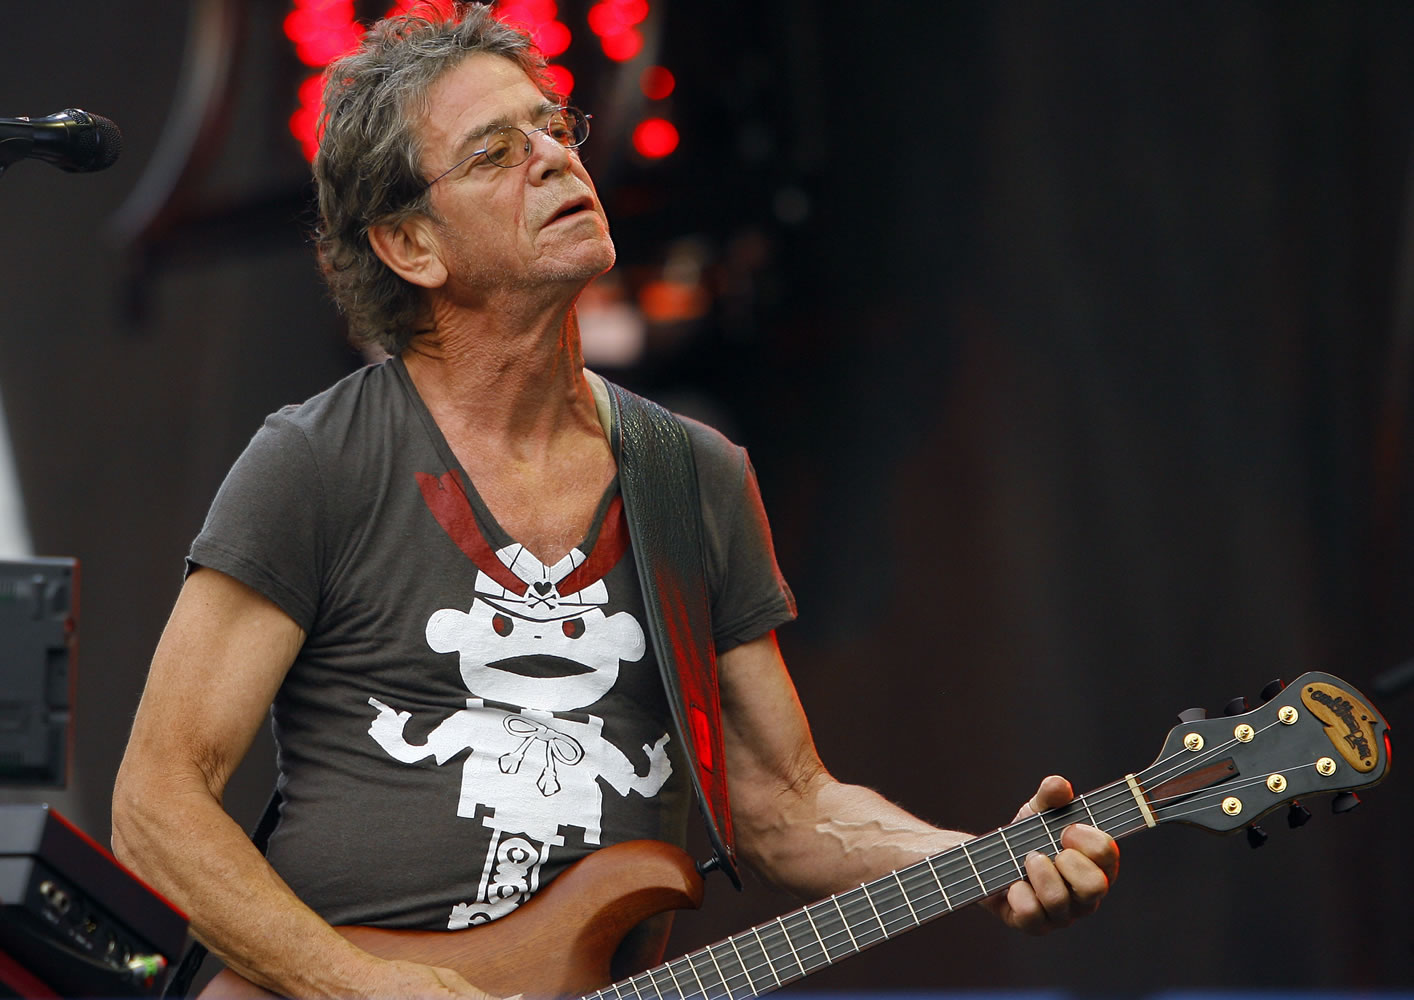 Lou Reed performs at the Lollapalooza music festival in Chicago in August 2009.